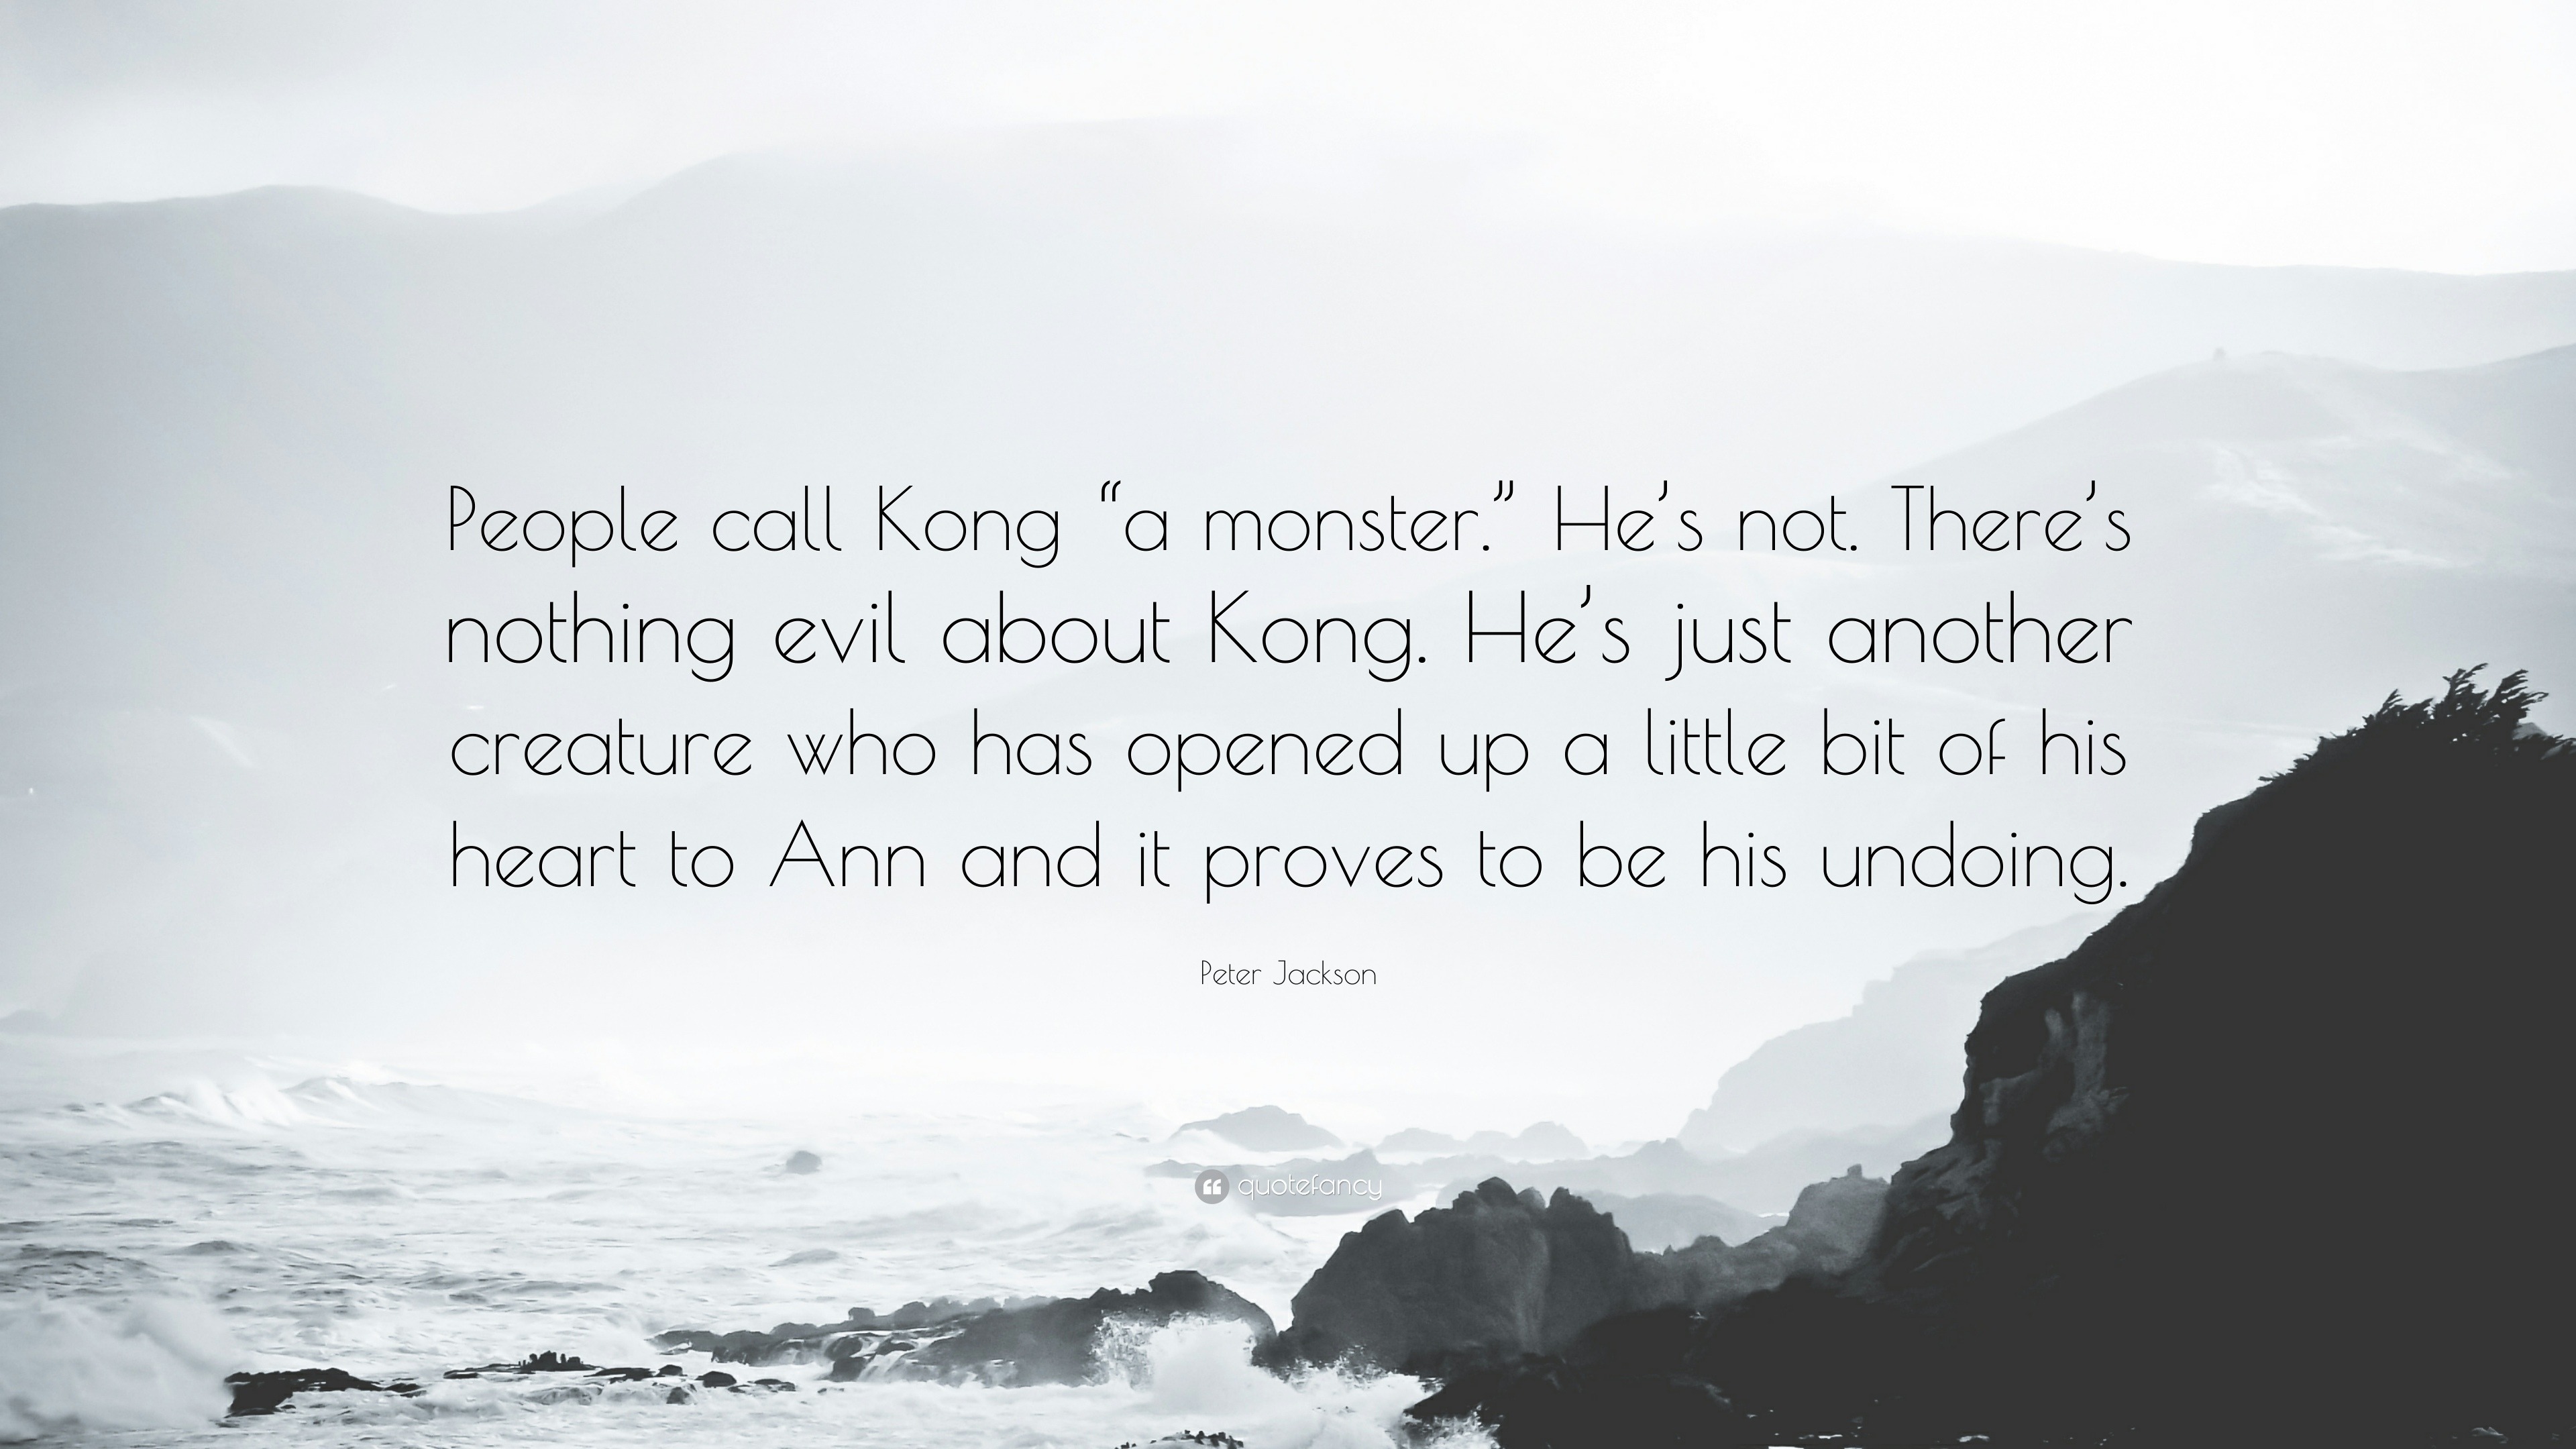 Peter Jackson Quote: “People call Kong